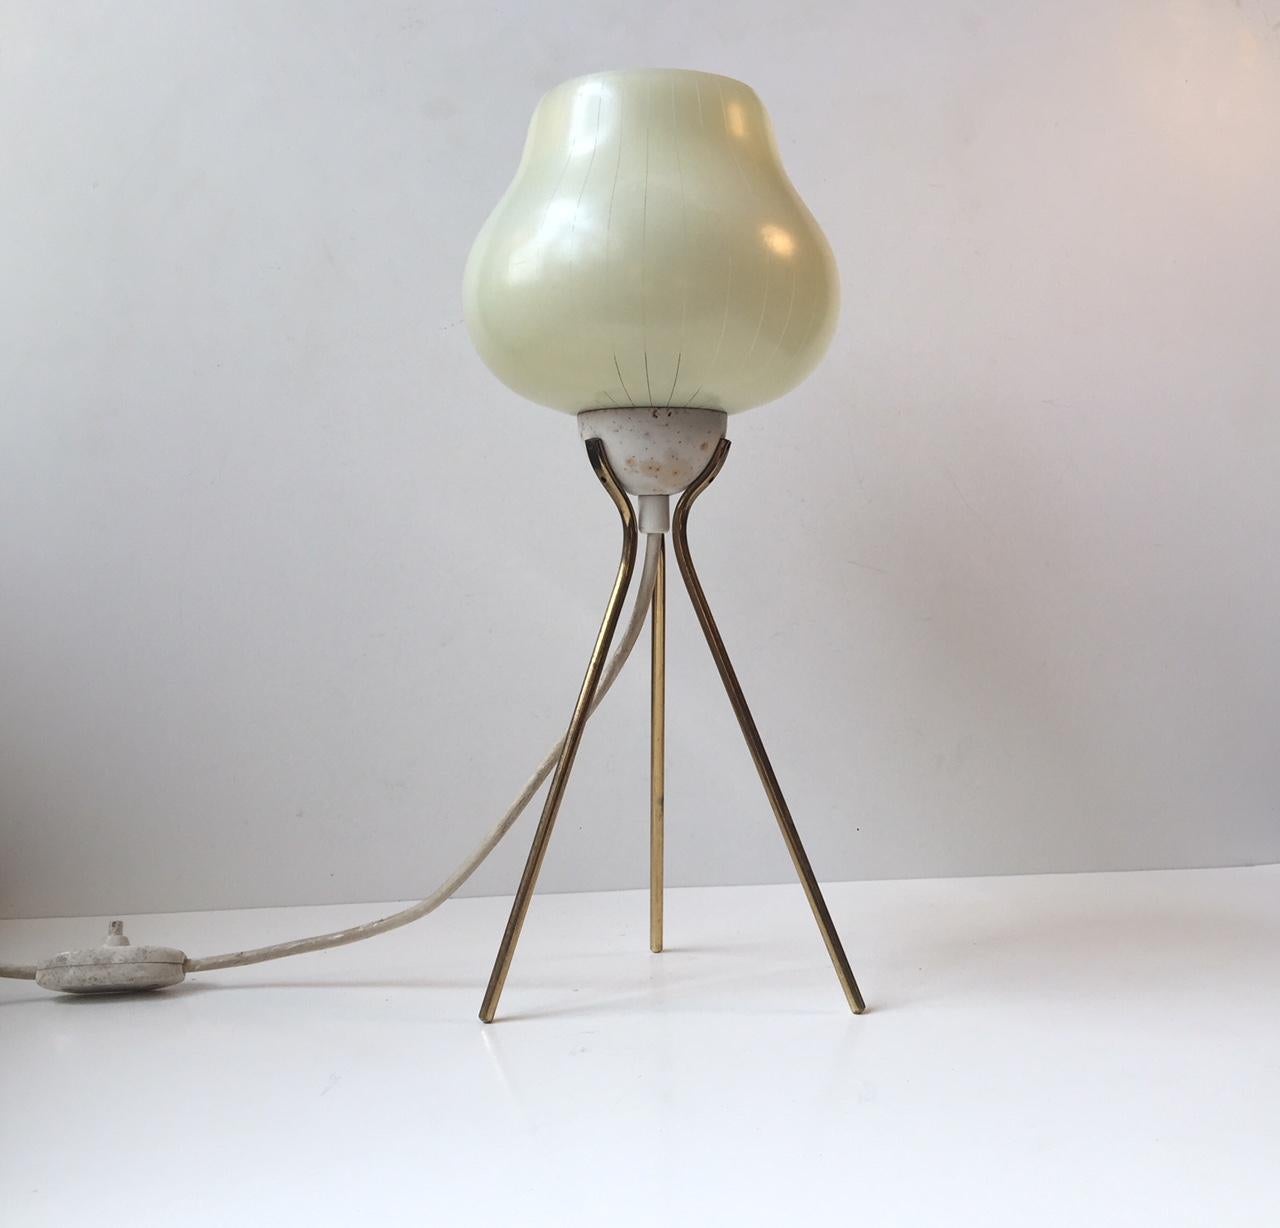 Elegant tristand table or desk lamp with rounded of brass legs and pin-striped glass shade. It was manufactured in Italy during the late 1950s or early 1960s in a style reminiscent of T. H. Robsjohn-Gibbings.